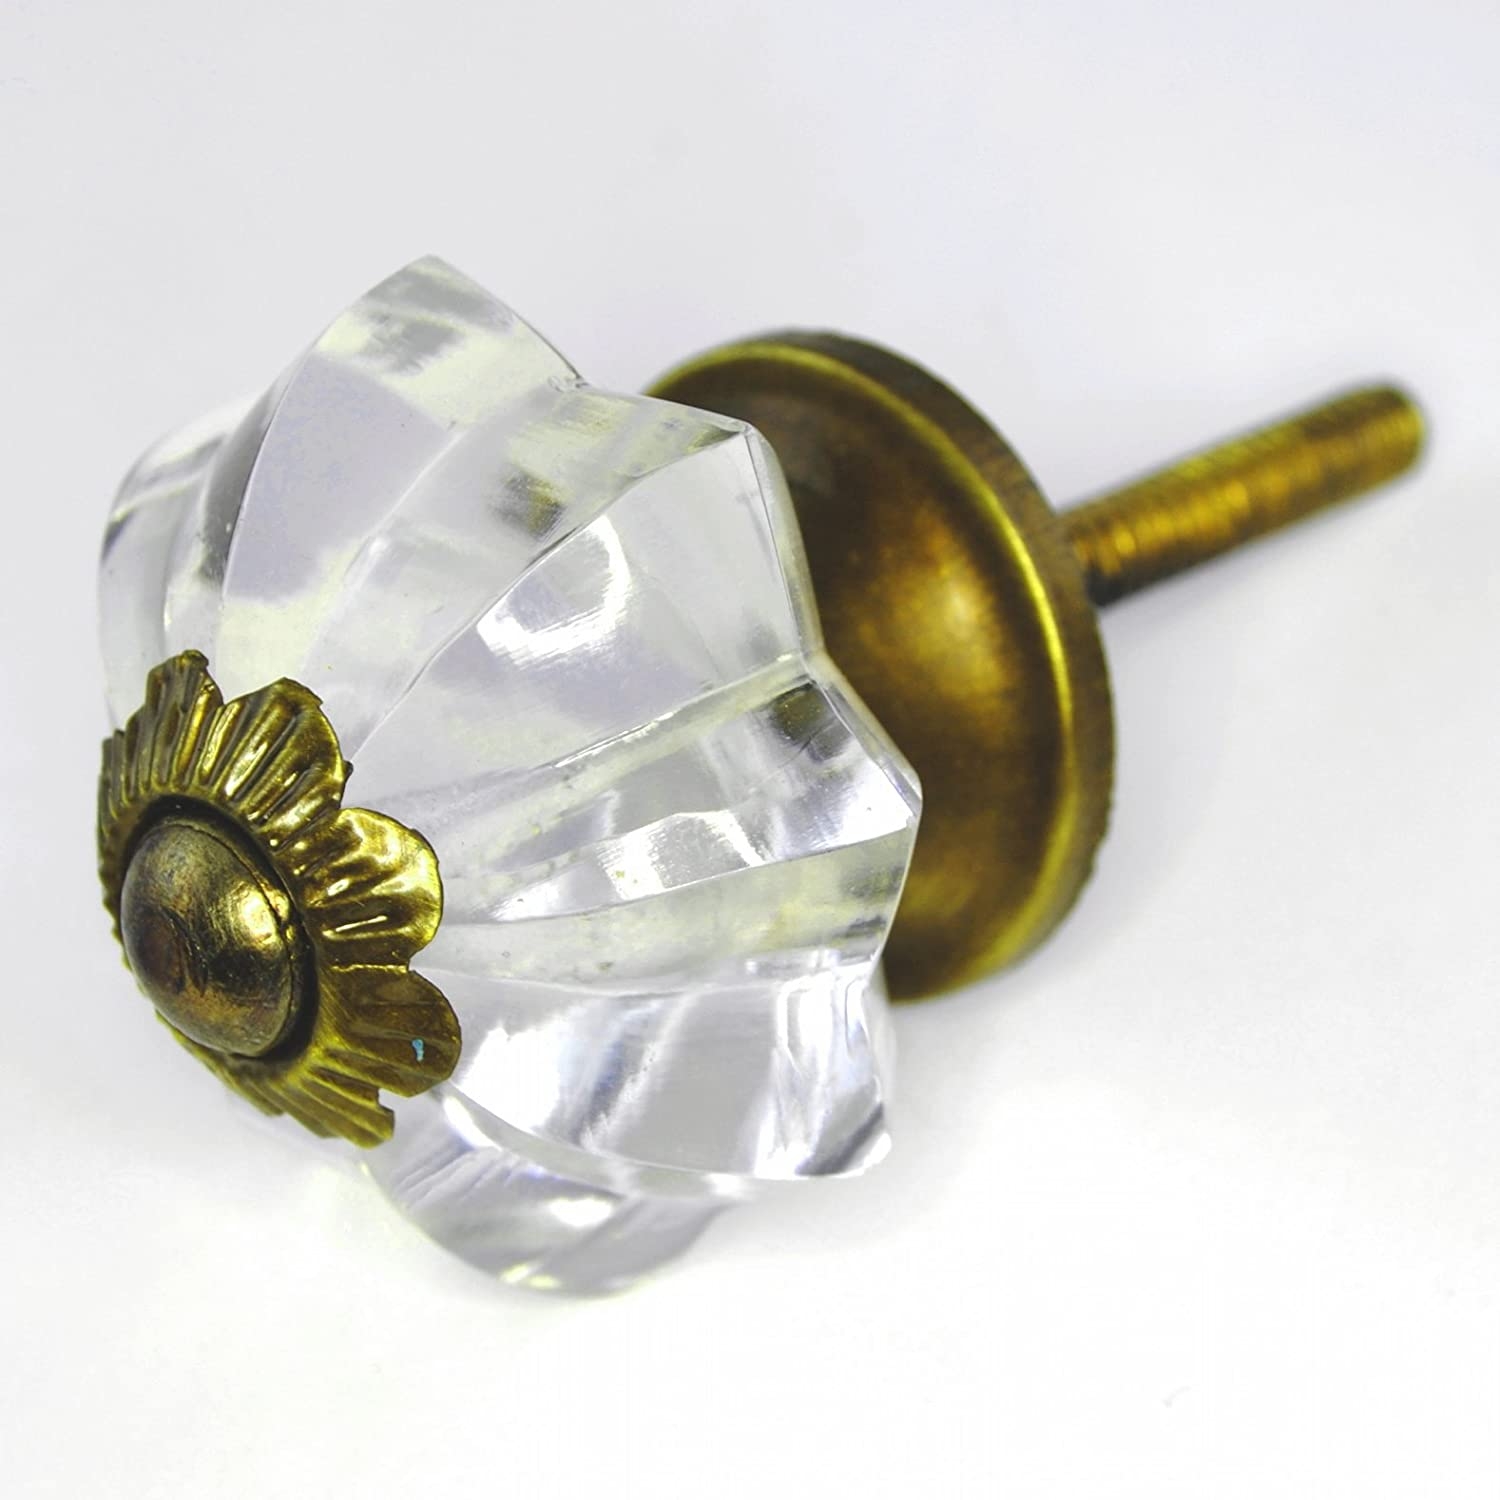 Fancy Clear Glass Cabinet Knobs, Dresser Drawer Handles & Pull Set/2pc ~ IK204 Clear Melon Shaped Hand Cut Glass Knobs for Armoire, Kitchen Cabinets, Cupboards, and Second Hand Furniture